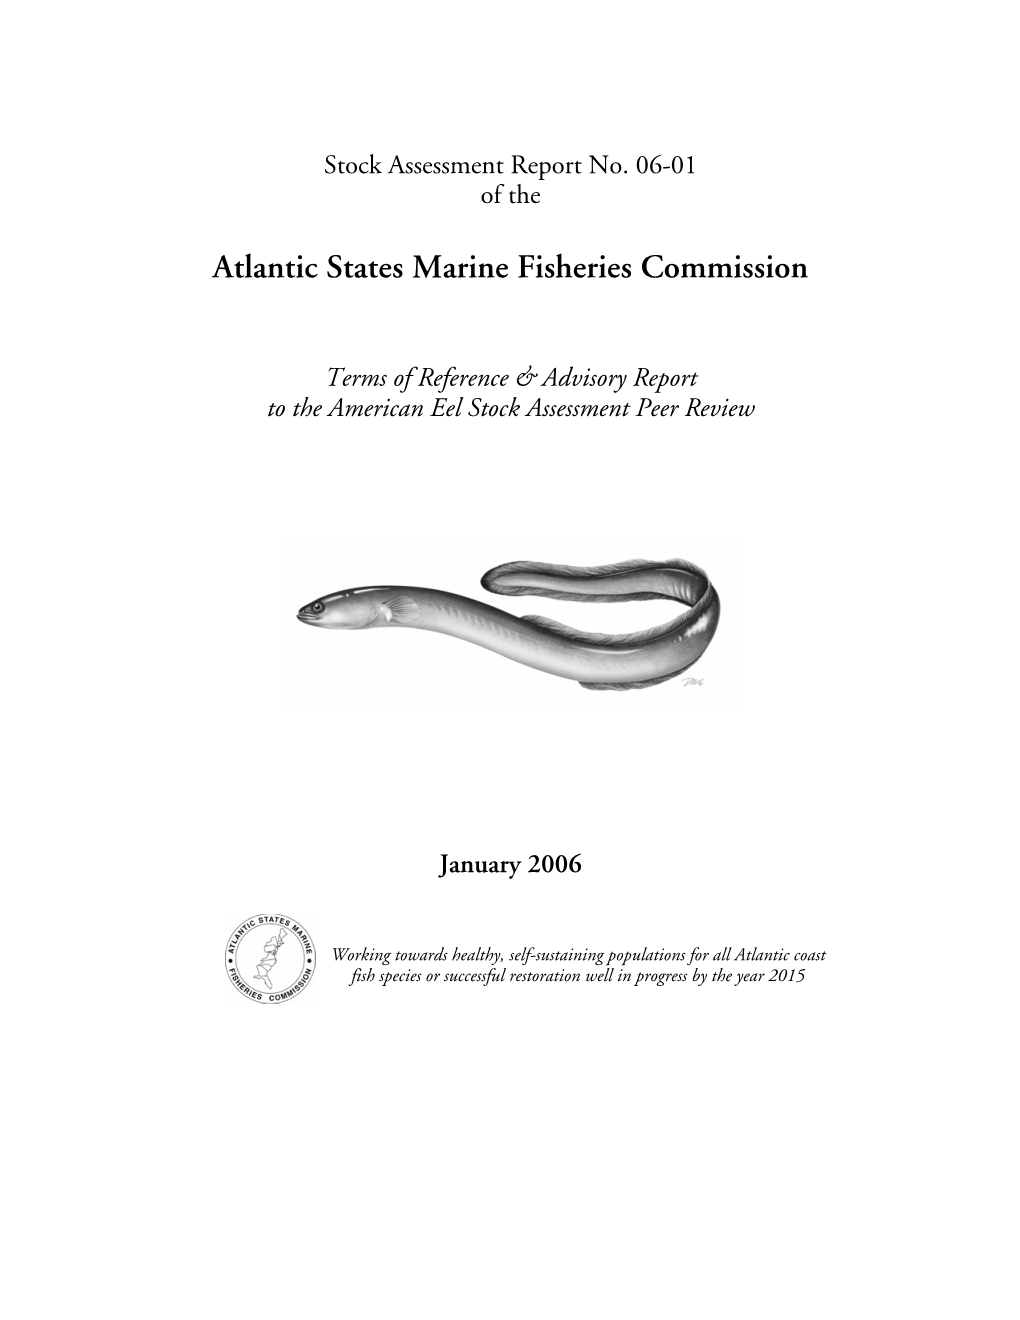 Terms of Reference & Advisory Report to the American Eel Stock